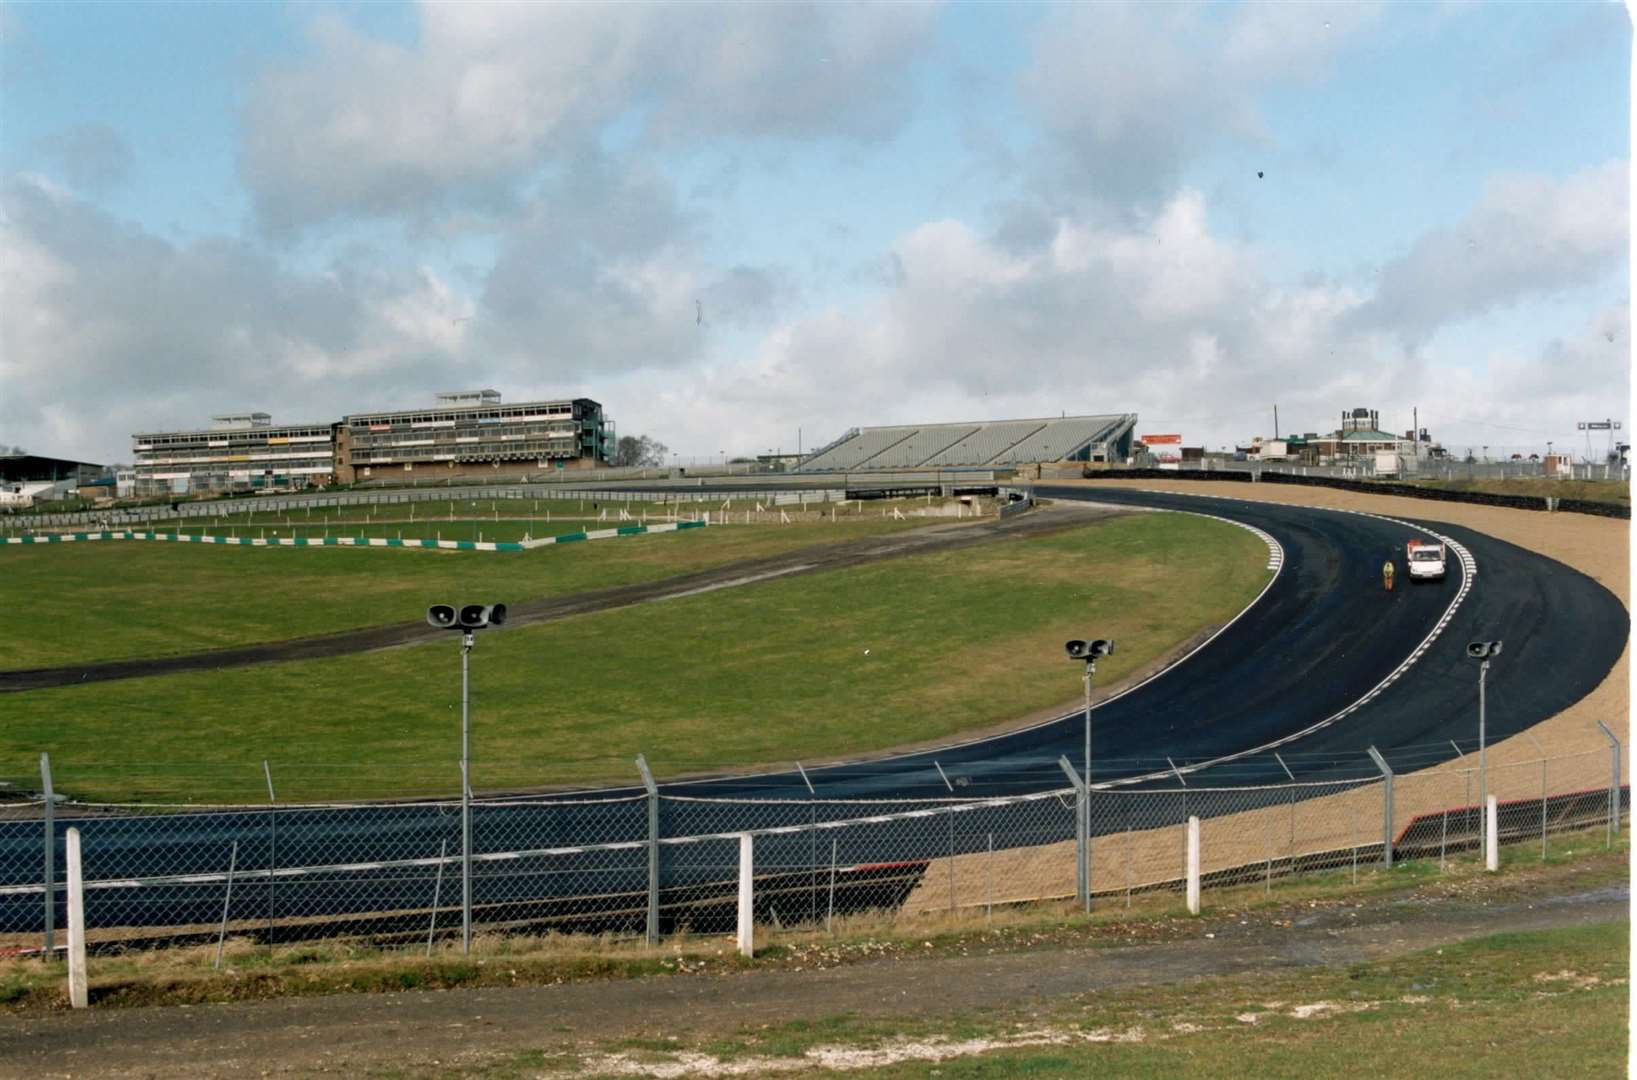 Hailwood Hill and the Paddock Hill bend is one of the most famous sections of circuit in British motorsport. A new grandstand has replaced some of the old stands at the top of the hill on the main straight. File pictured dated February 25, 1997